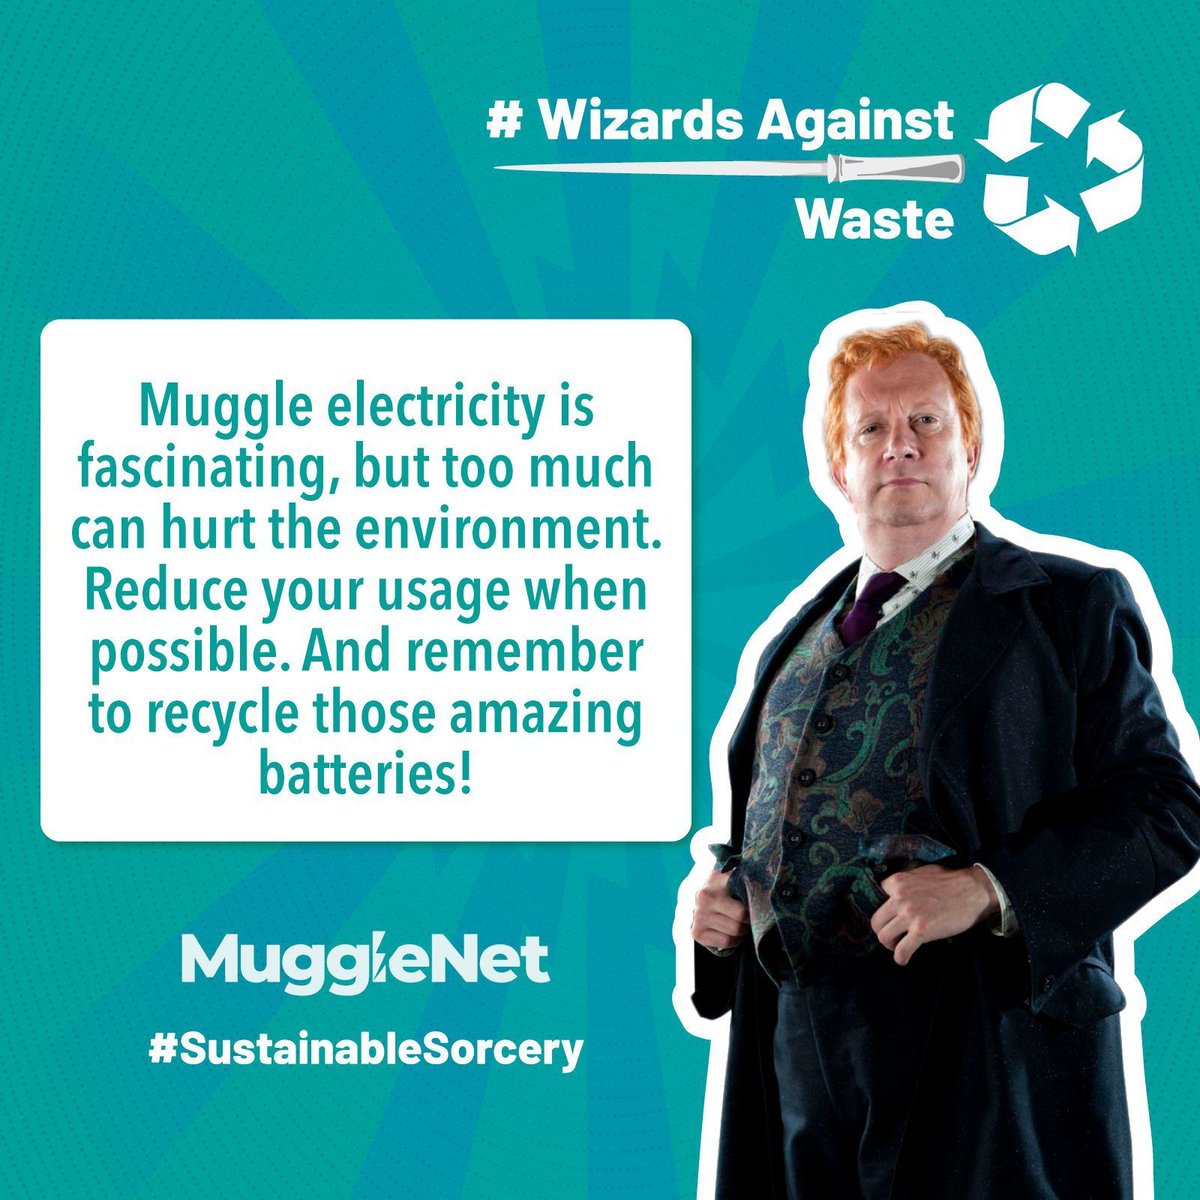 Let's cast our spells responsibly for a greener world! 🌍✨ Arthur Weasley's insight is magical. 💡 Limit Muggle electricity usage to protect our environment. 🔄 #WizardsAgainstWaste #SustainableSorcery